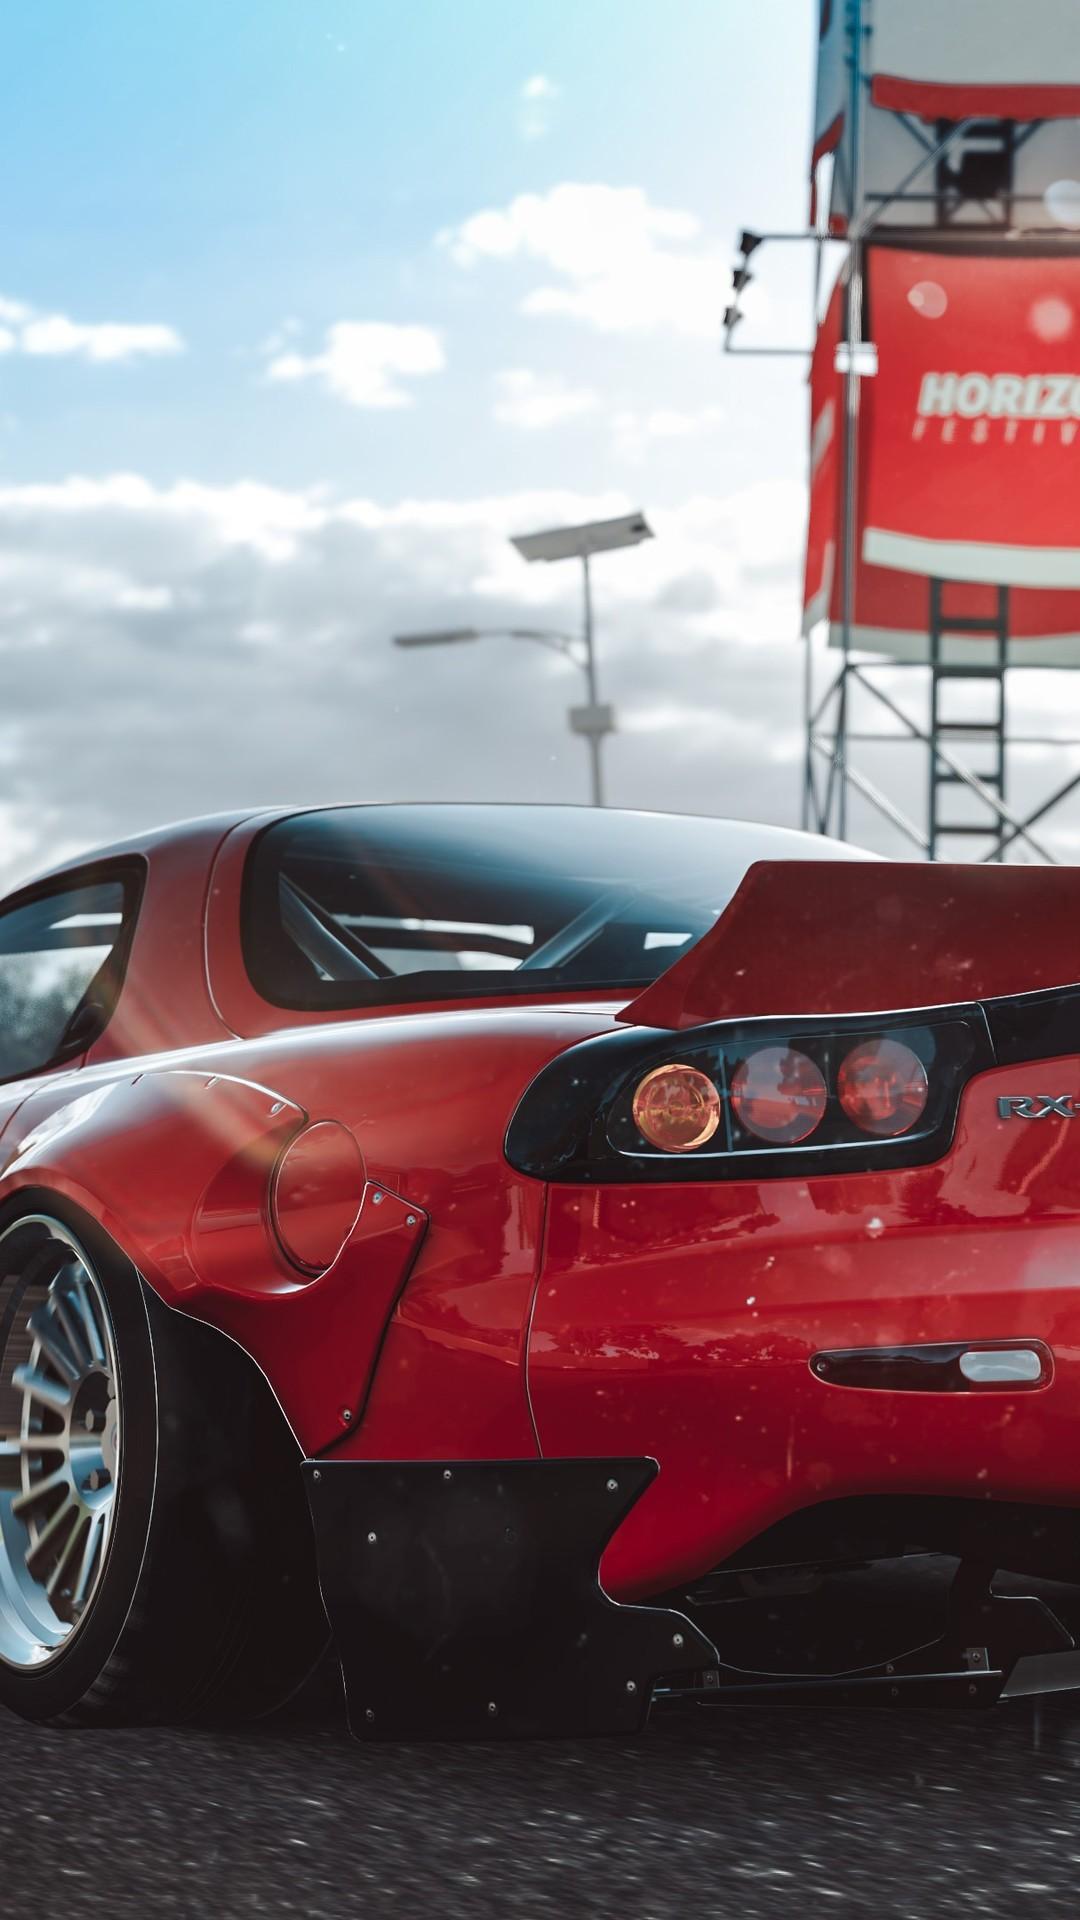 Rx7 Hd Wallpaper For Android Apk Download - roblox rx7